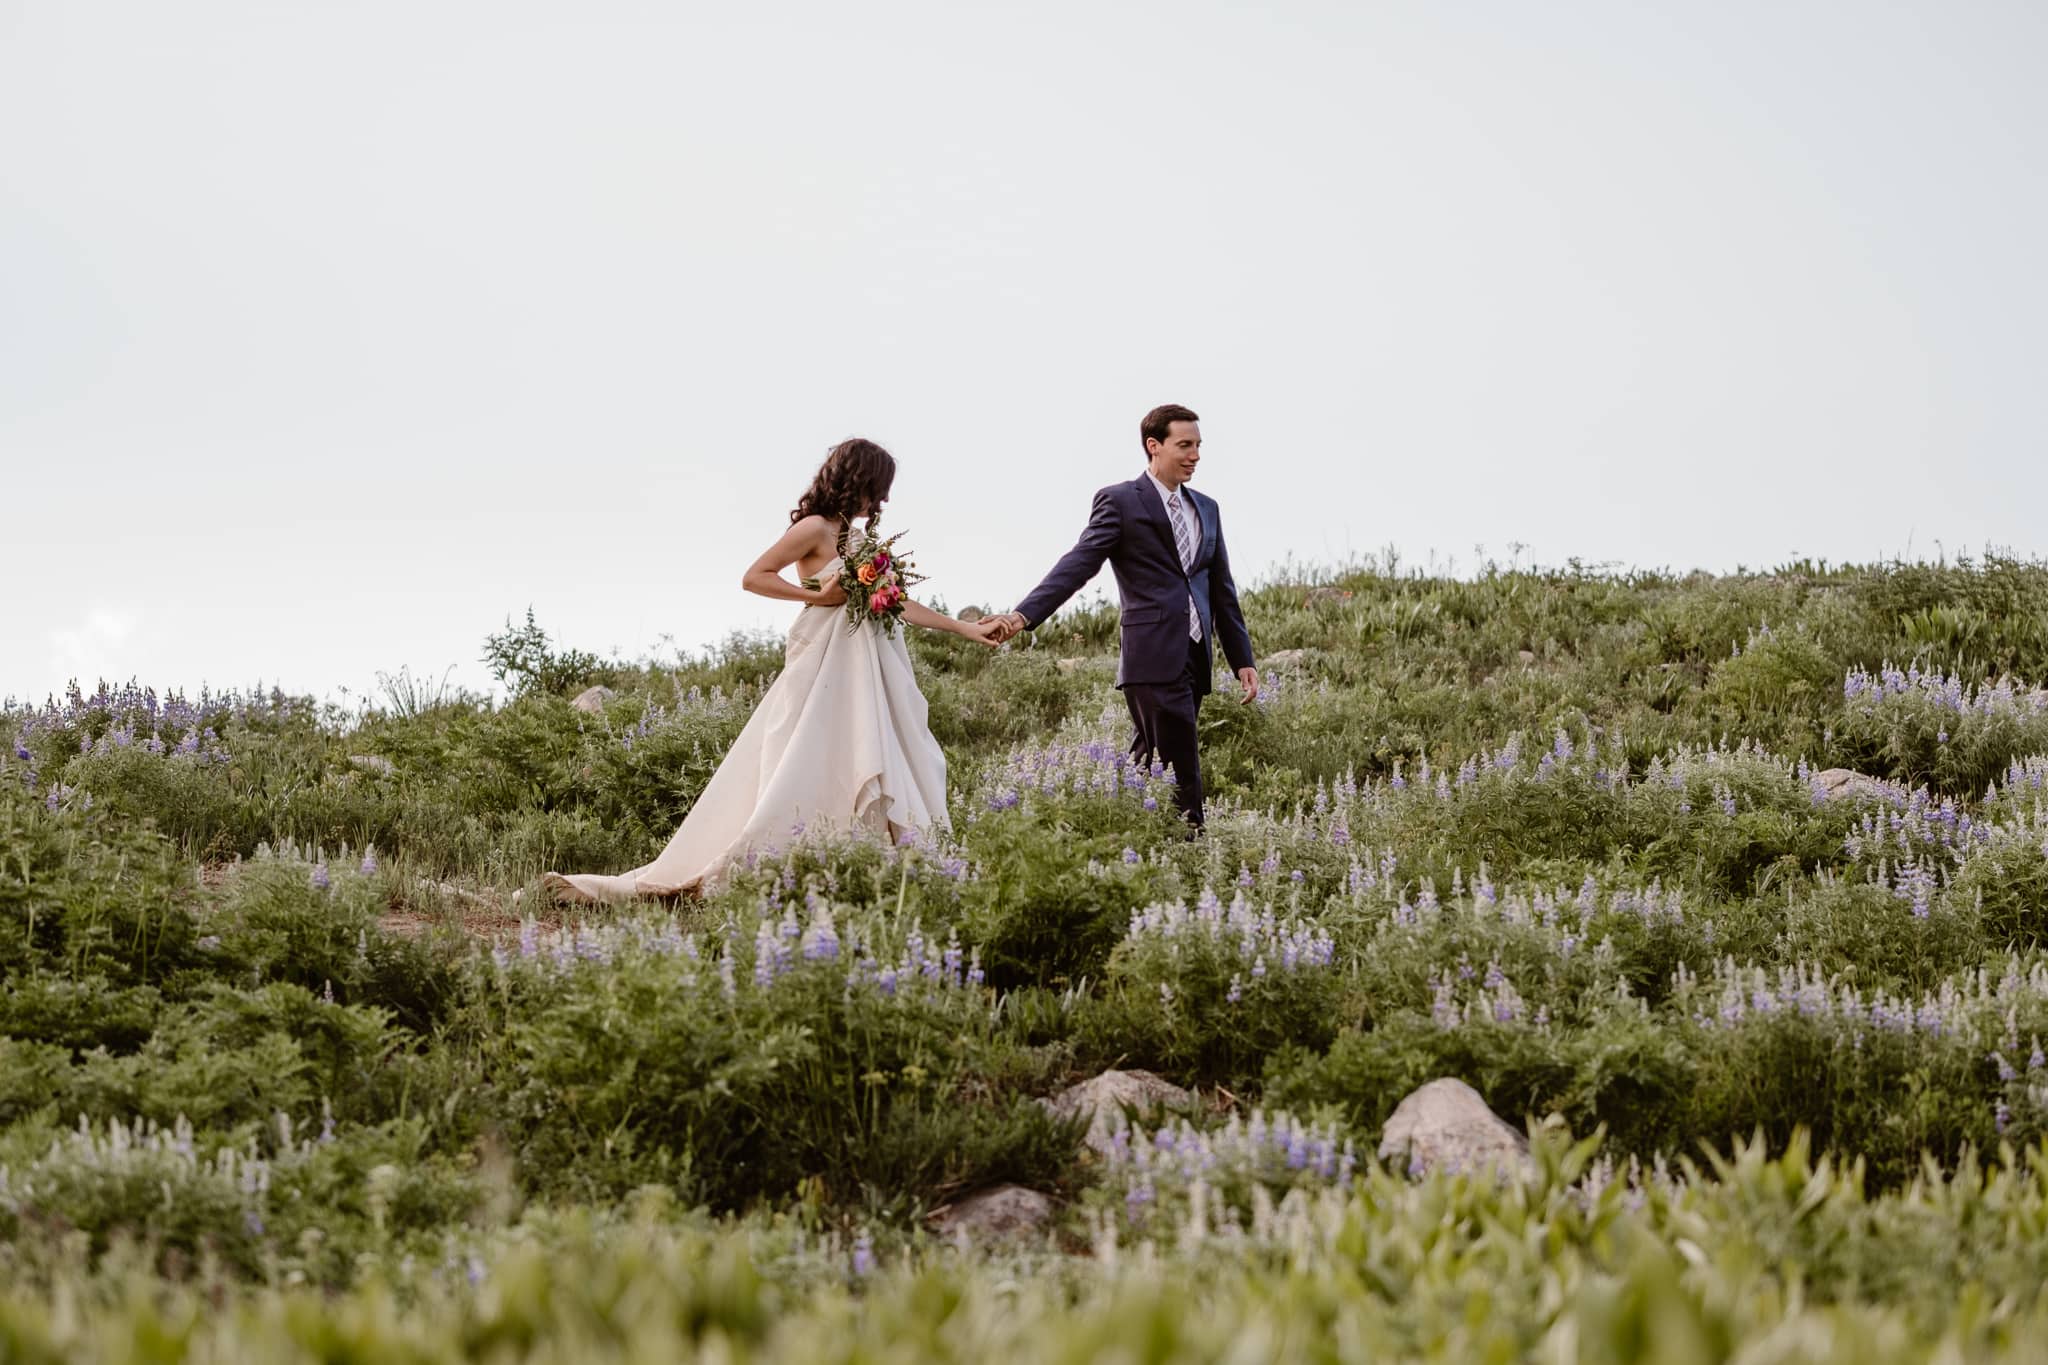 Crested Butte elopement photographer, Colorado adventure wedding photographer, bride and groom hiking through wildflowers, weekday elopement